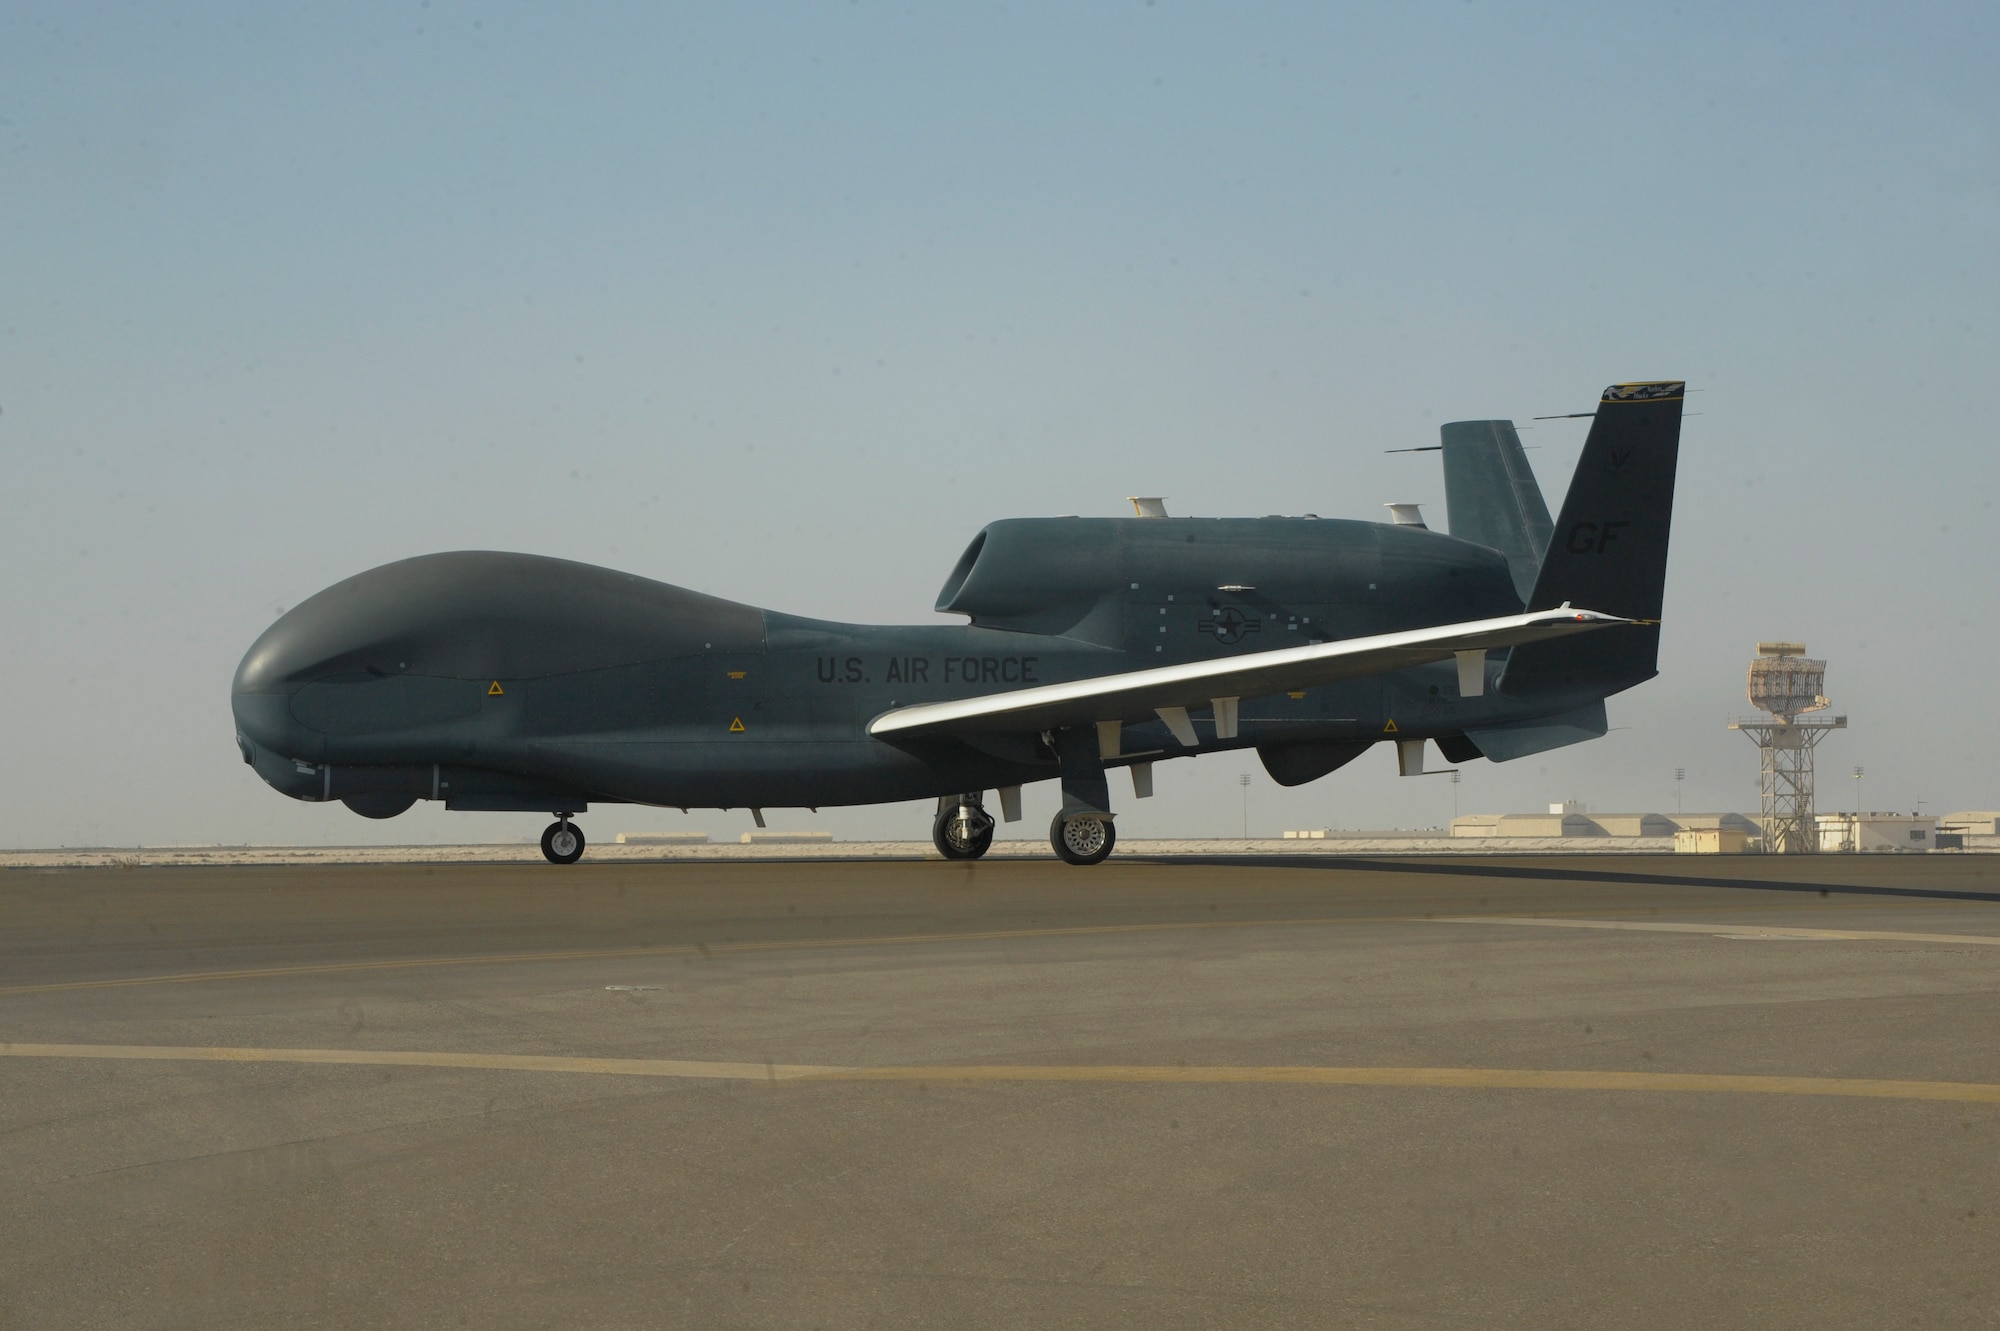 An U.S. Air Force RQ-4 Global Hawk logs over 20,000 flight hours Feb. 13, 2018 at Al Dhafra Air Base, United Arab Emirates. The Global Hawk's mission is to provide a broad spectrum of ISR collection capability to support joint combatant forces in worldwide peacetime, contingency and wartime operations. (U.S. Air Force photo by Airman 1st Class D. Blake Browning)